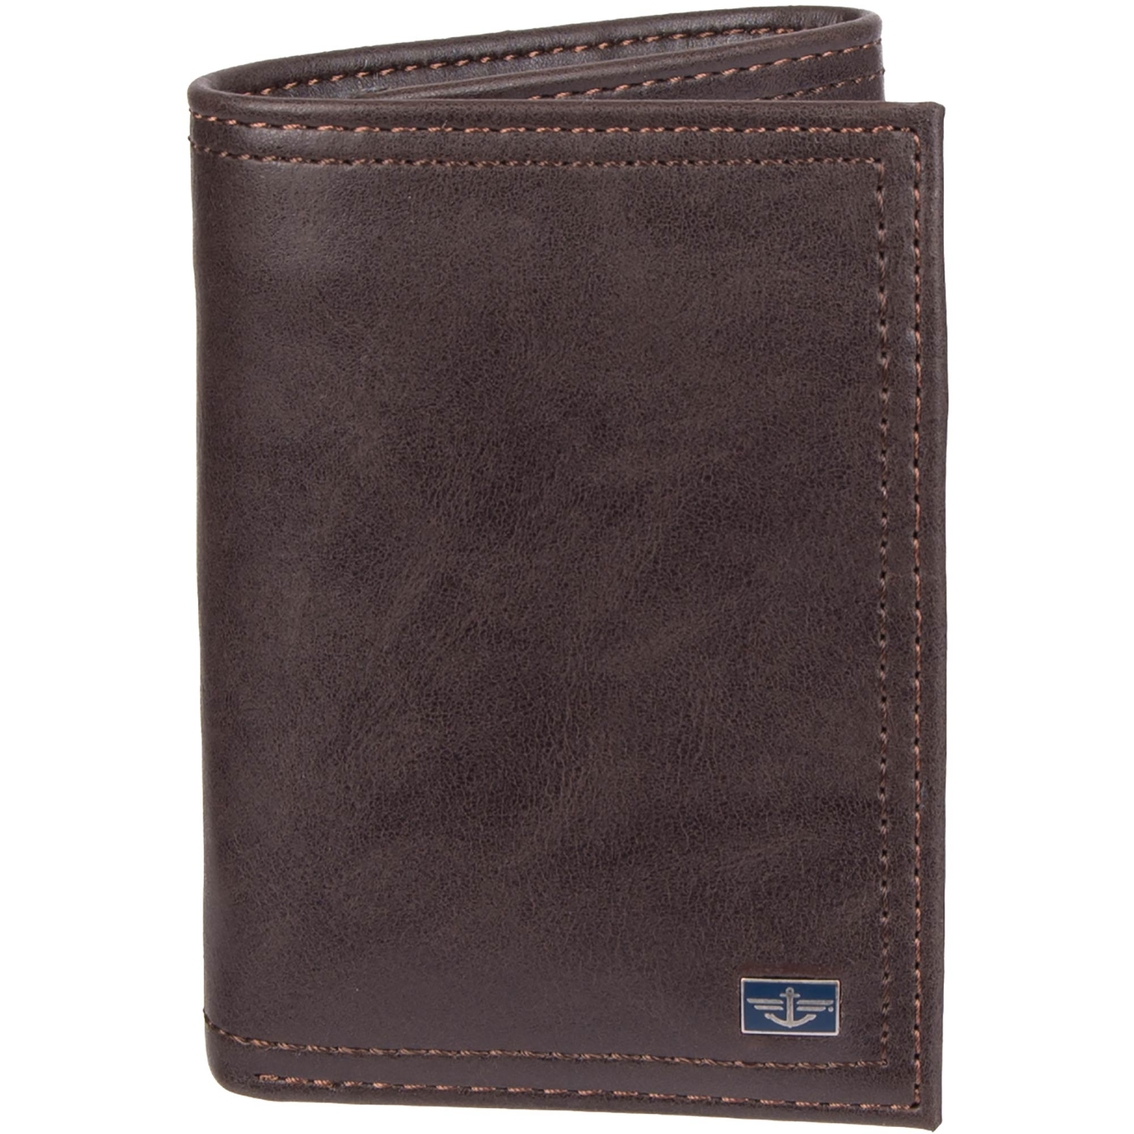 Dockers Rfid Blocking Trifold Wallet With Zipper Pocket | Wallets ...